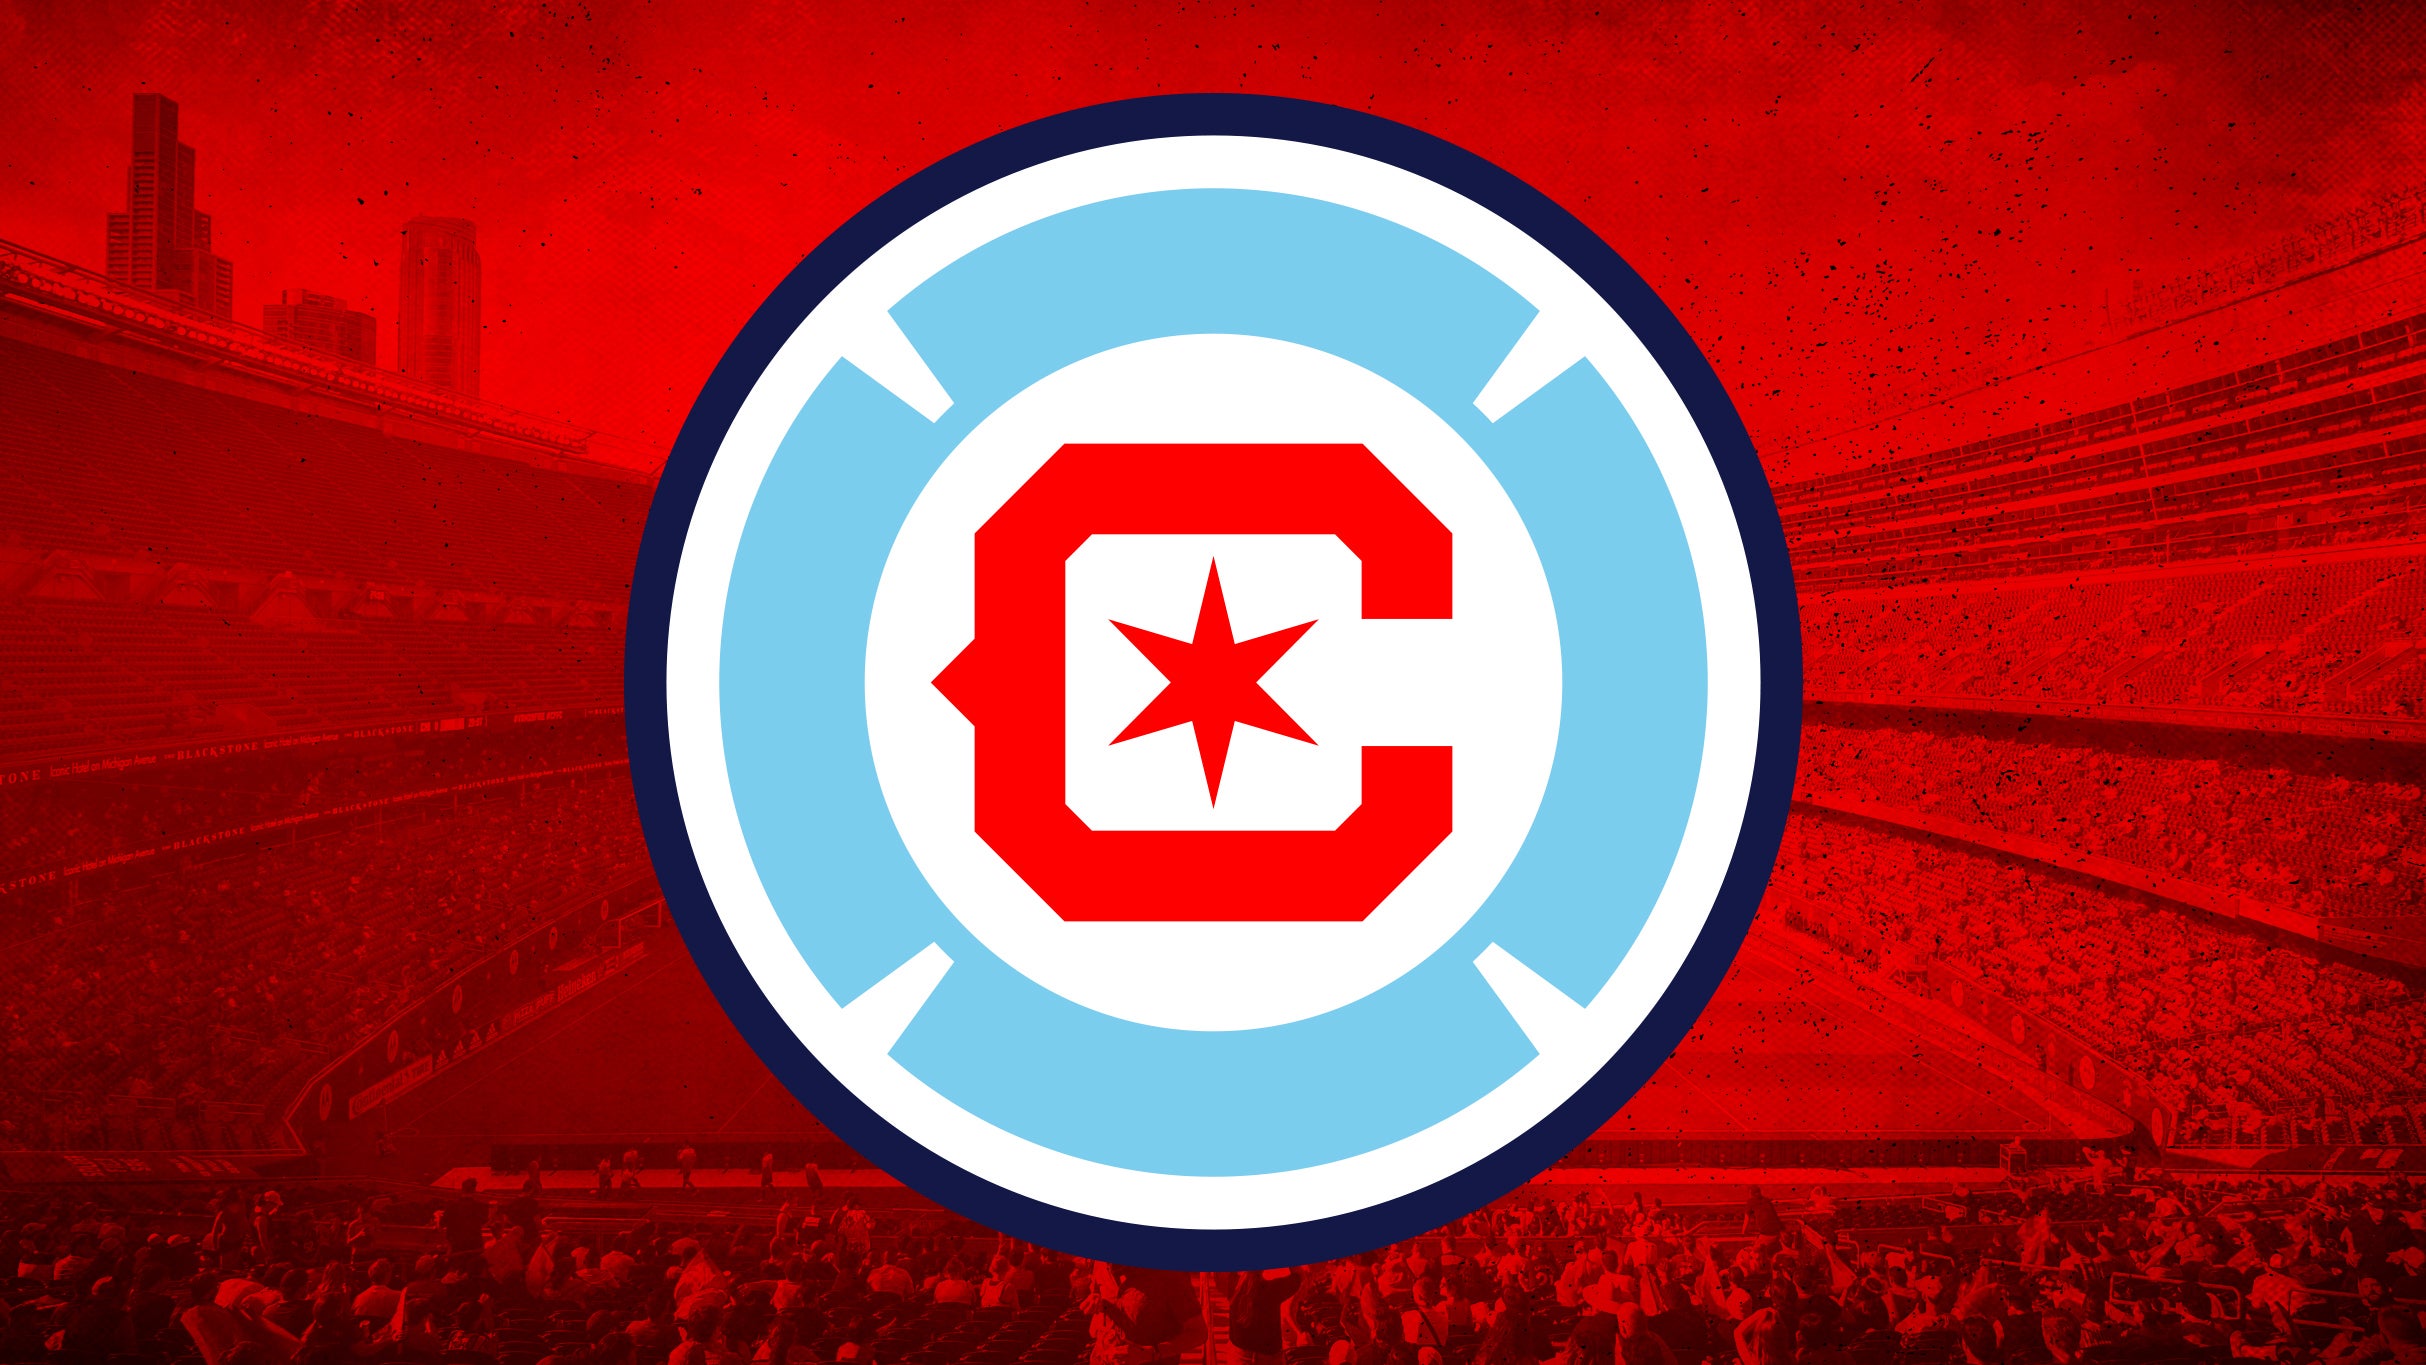 Chicago Fire FC